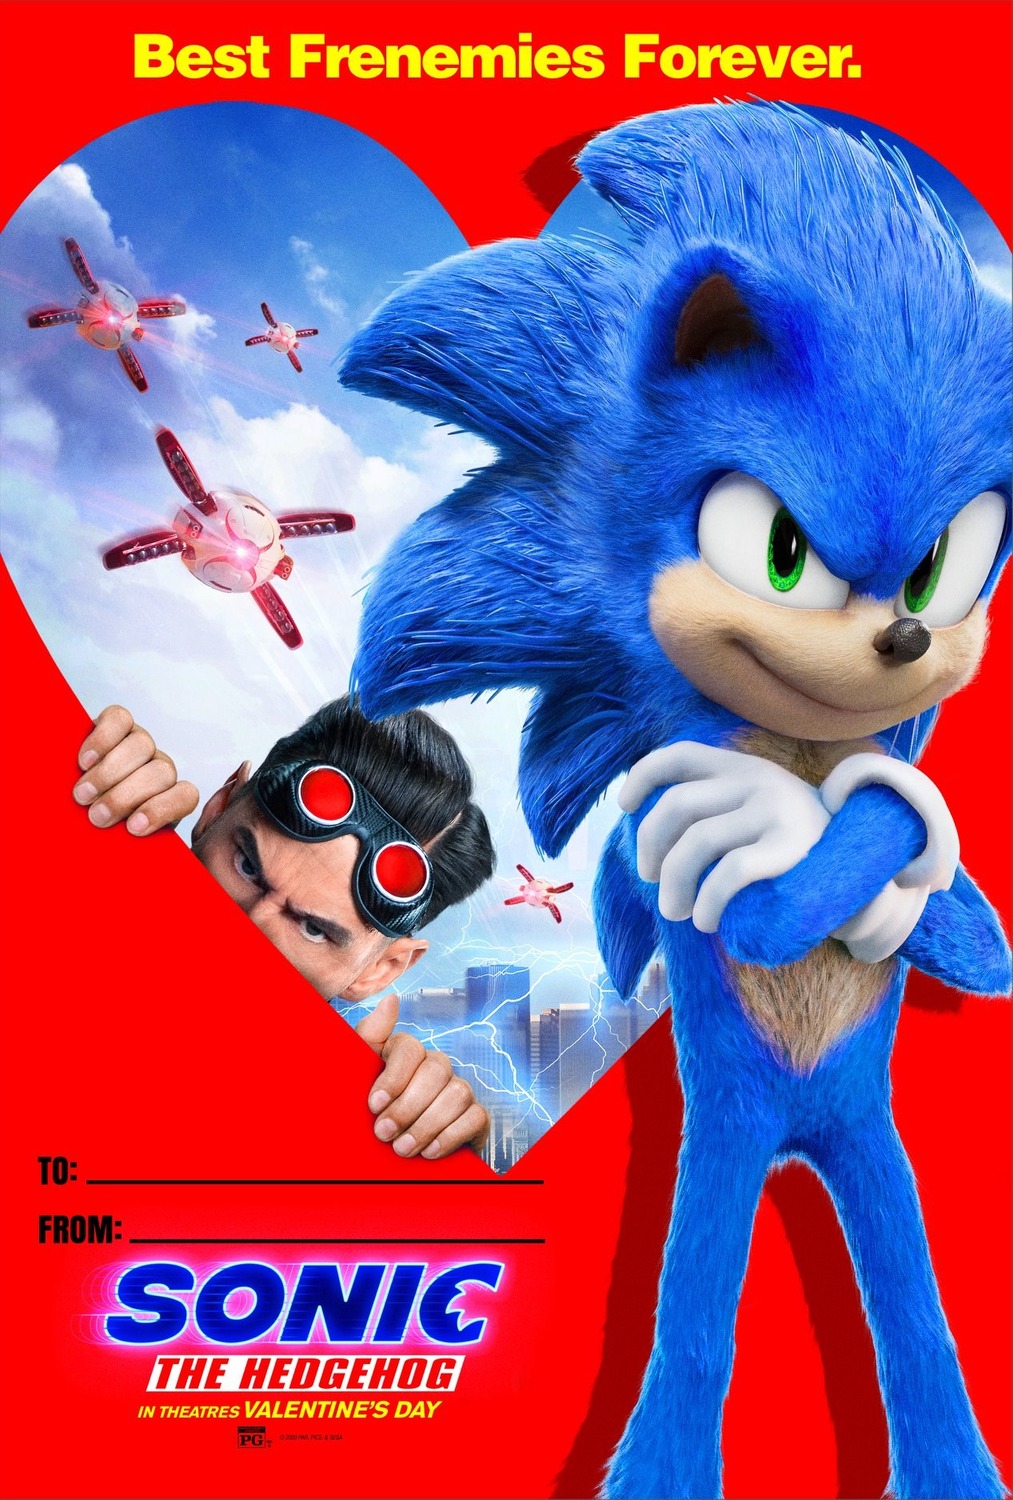 Sonic the Hedgehog (#27 of 28): Extra Large Movie Poster Image - IMP Awards